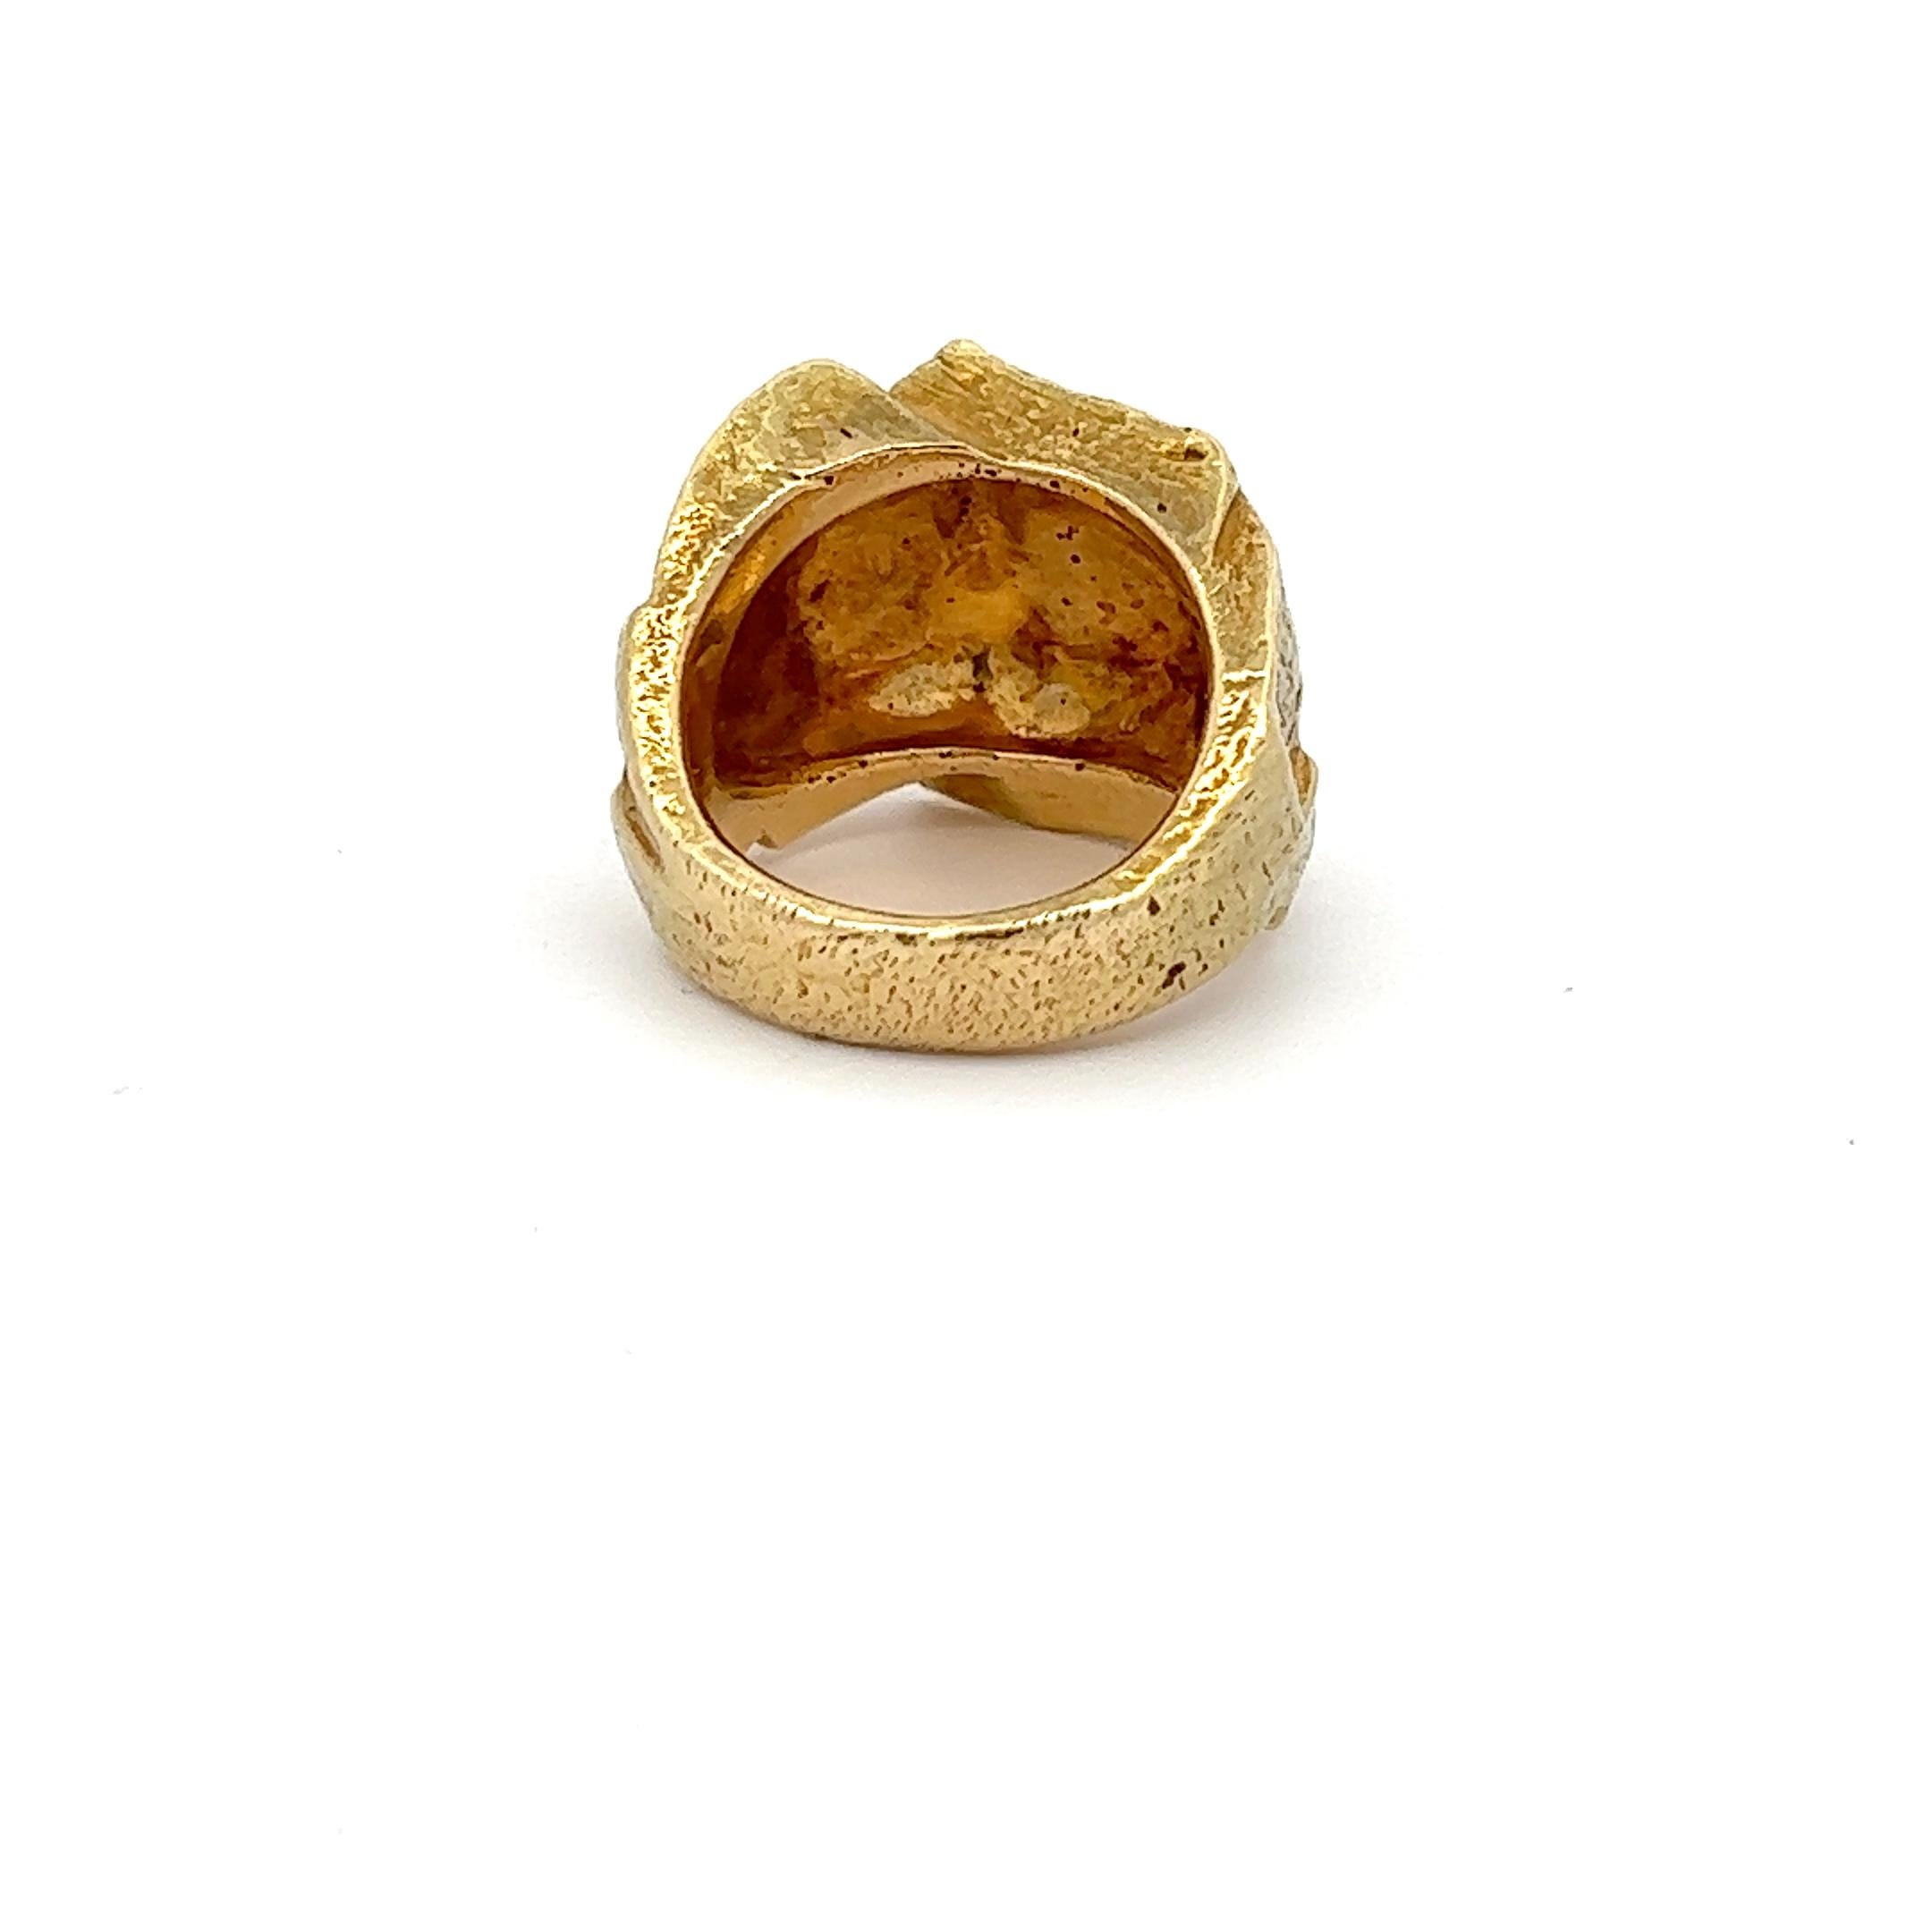 An 18k yellow gold ring by Kutchinsky.
Size: 53, can be resized within limits.
The ring is marked with the UK hallmark for London 1967 and 18k gold. Also marked with the UK makers mark for Kutchinsky.
Also signed : Kutchinsky.
Comes with original